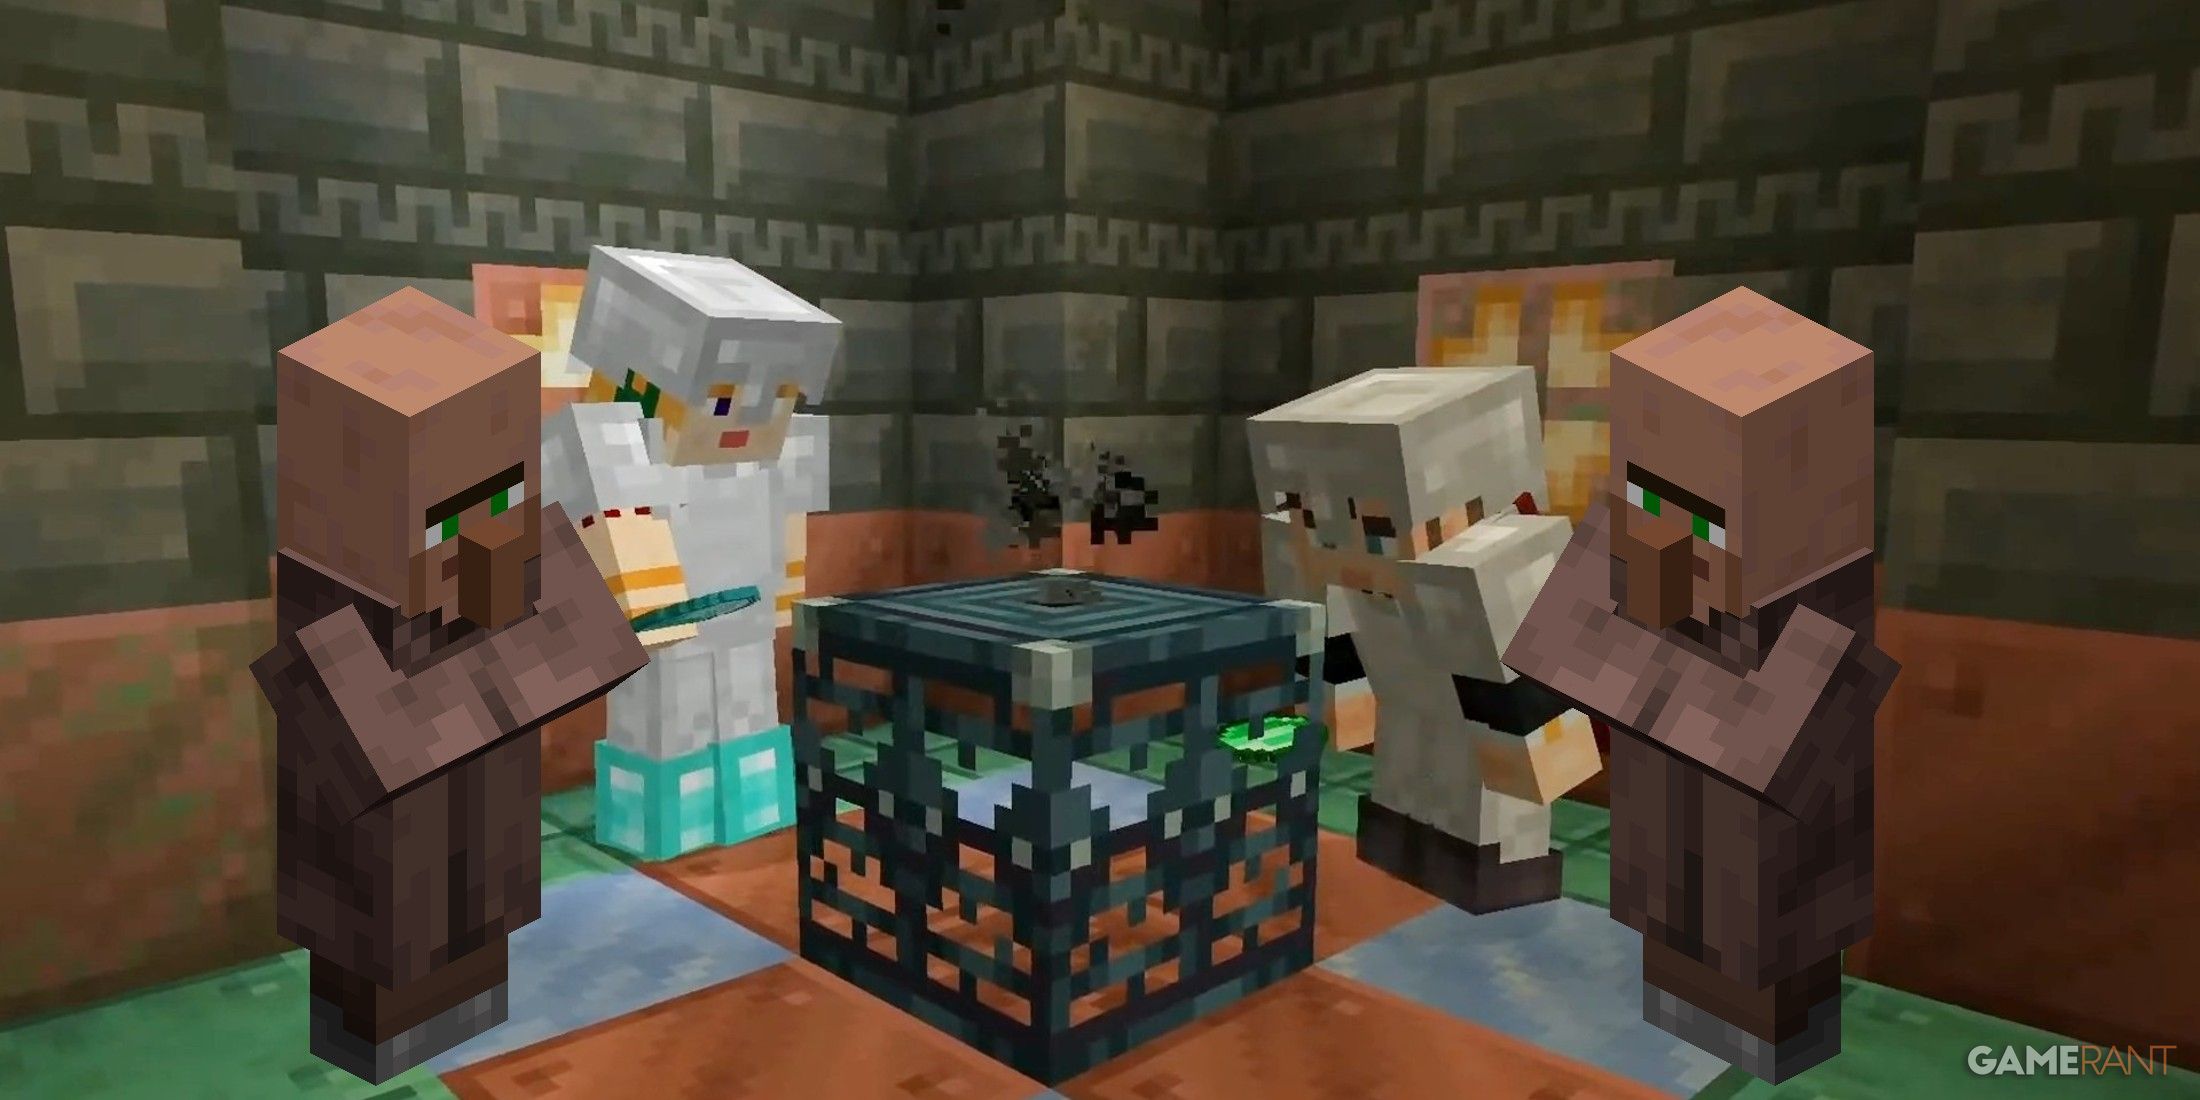 minecraft villagers in a trial chamber